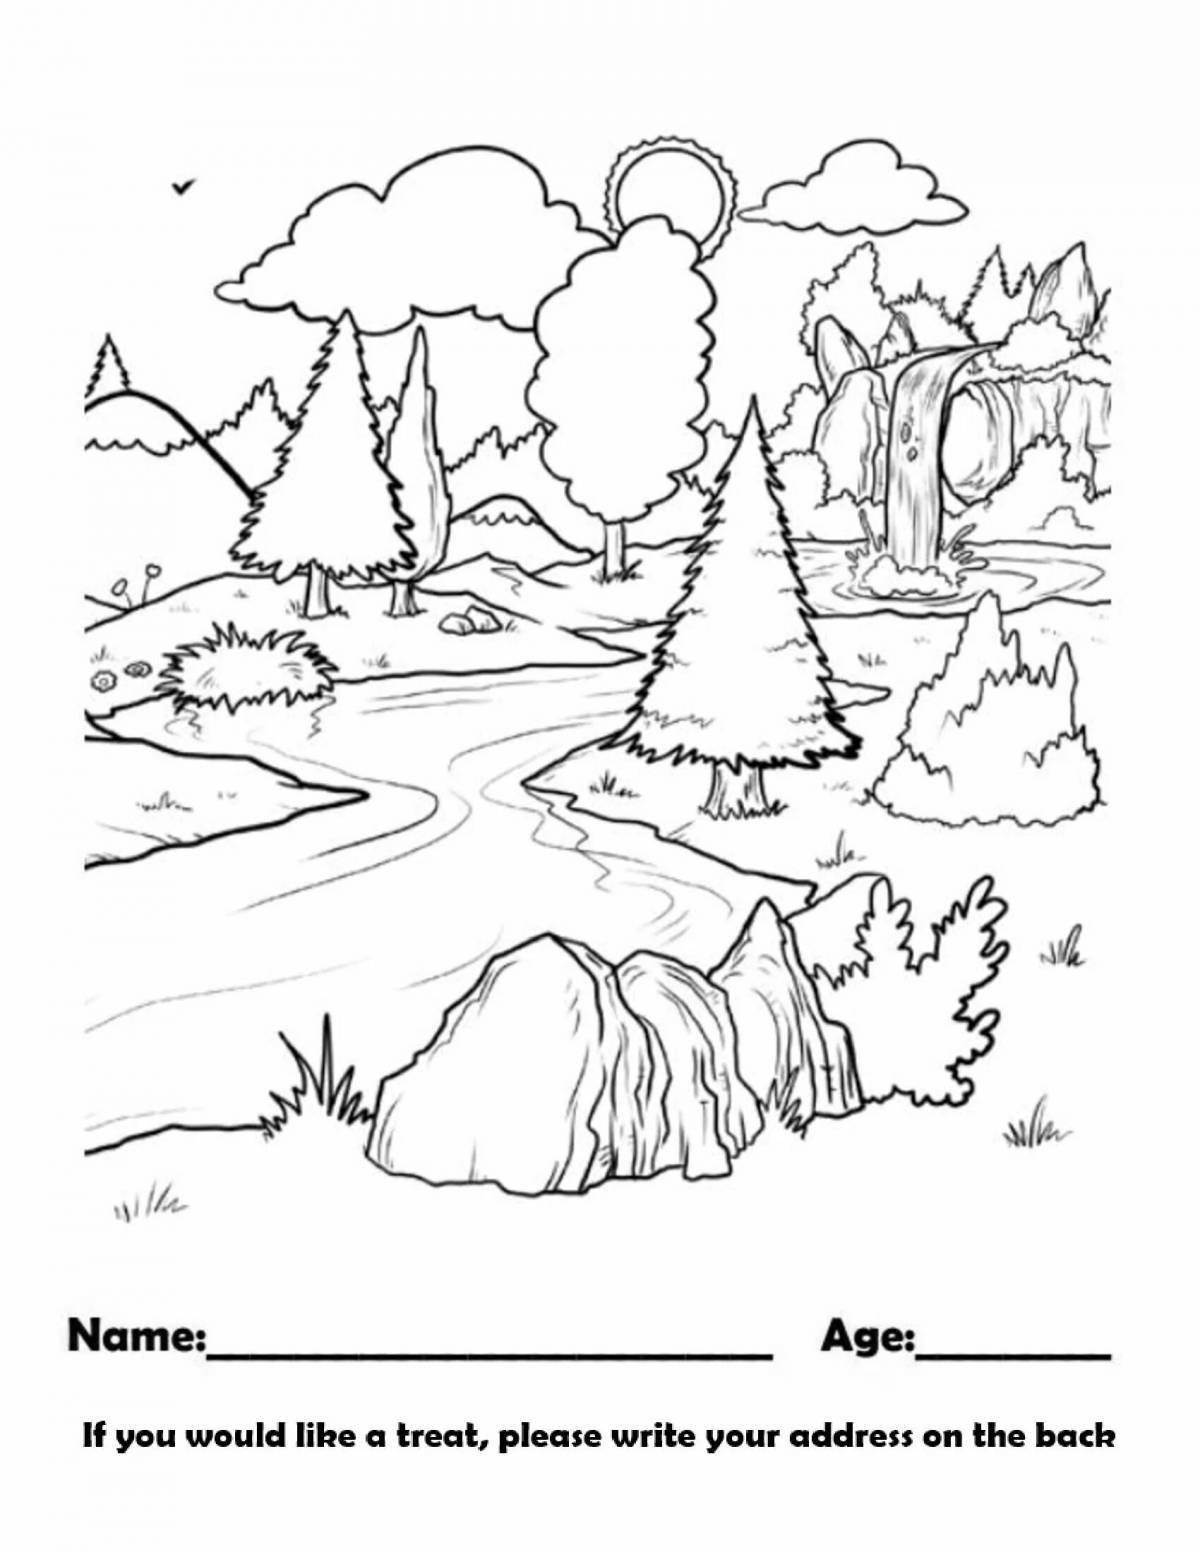 Amazing landscape for children 6-7 years old coloring book